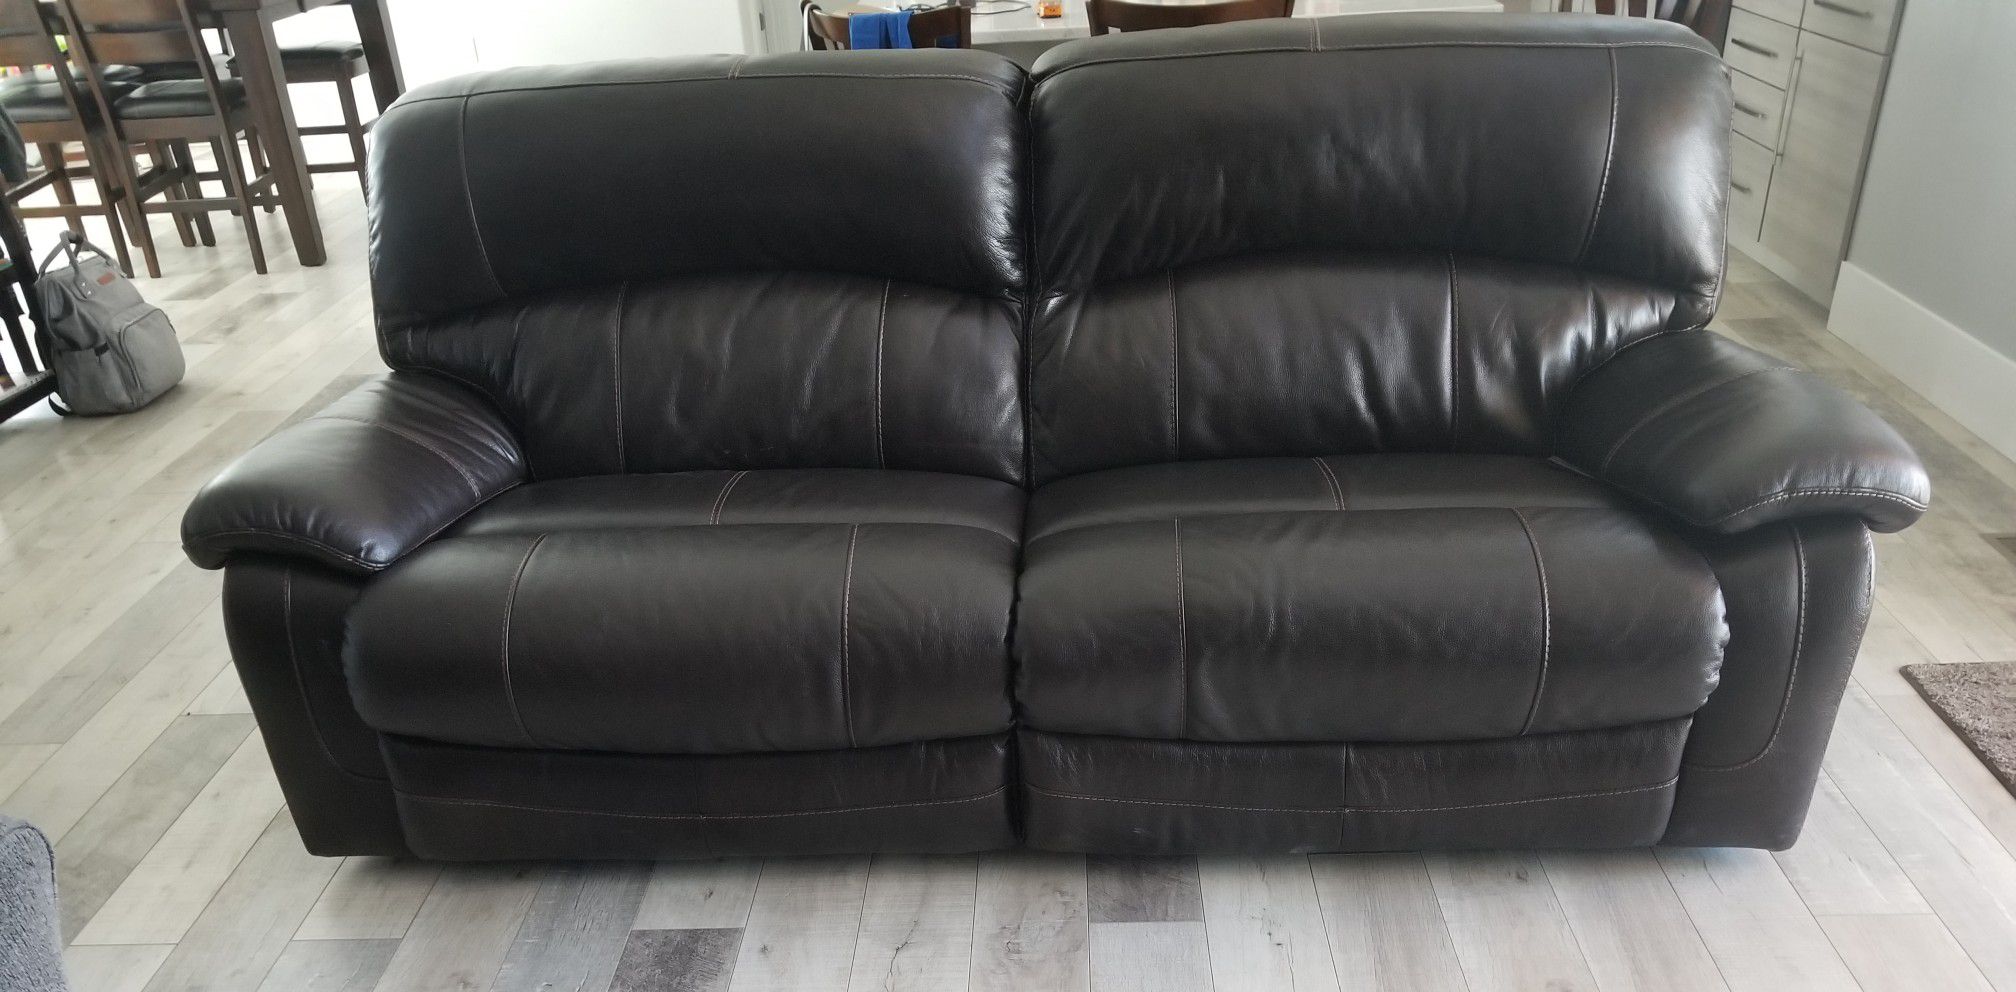 Brand New Leather Theater seat and couch